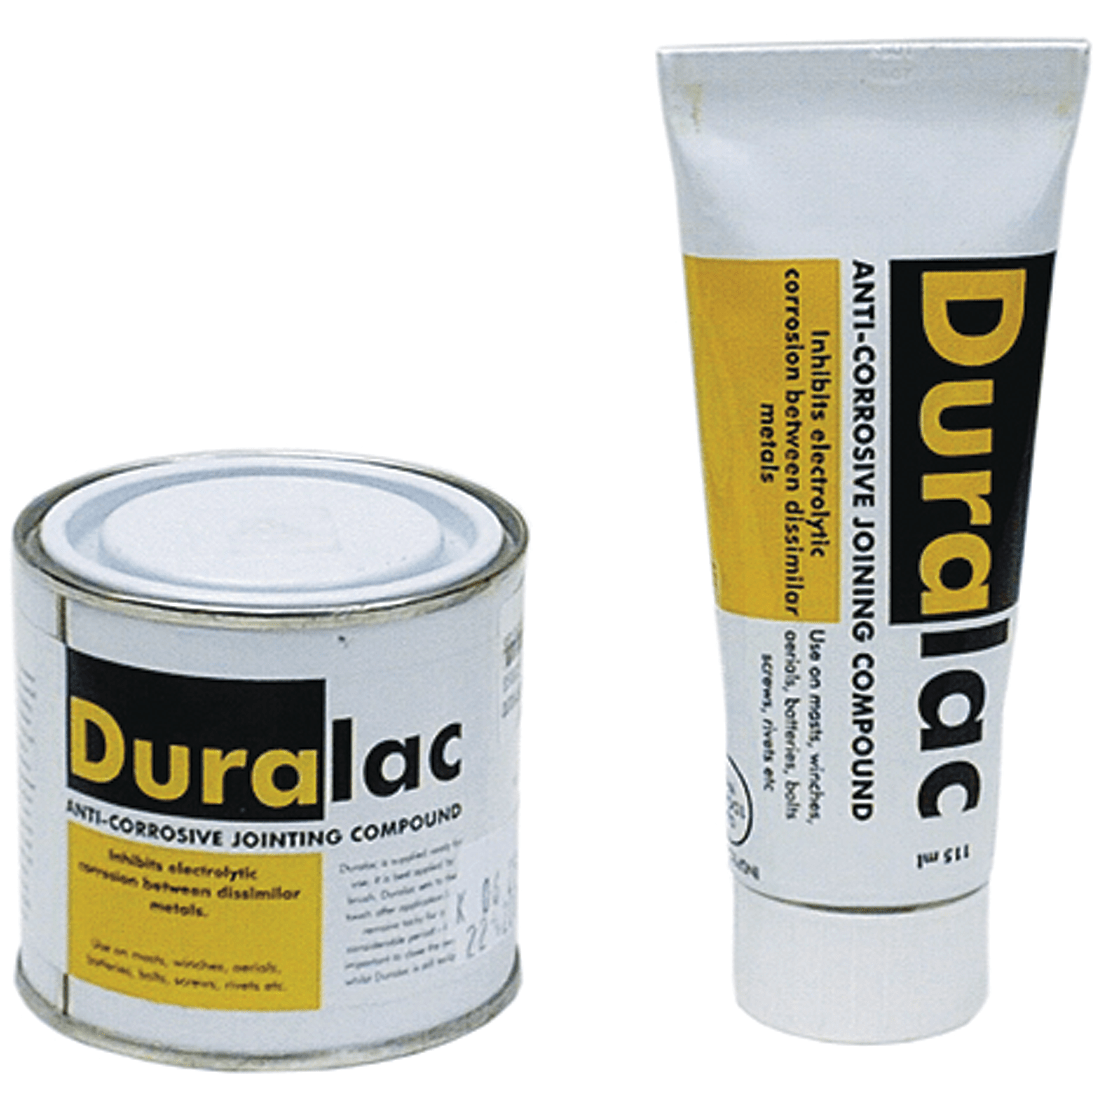 Duralac Anti-Corrosion Jointing Compound